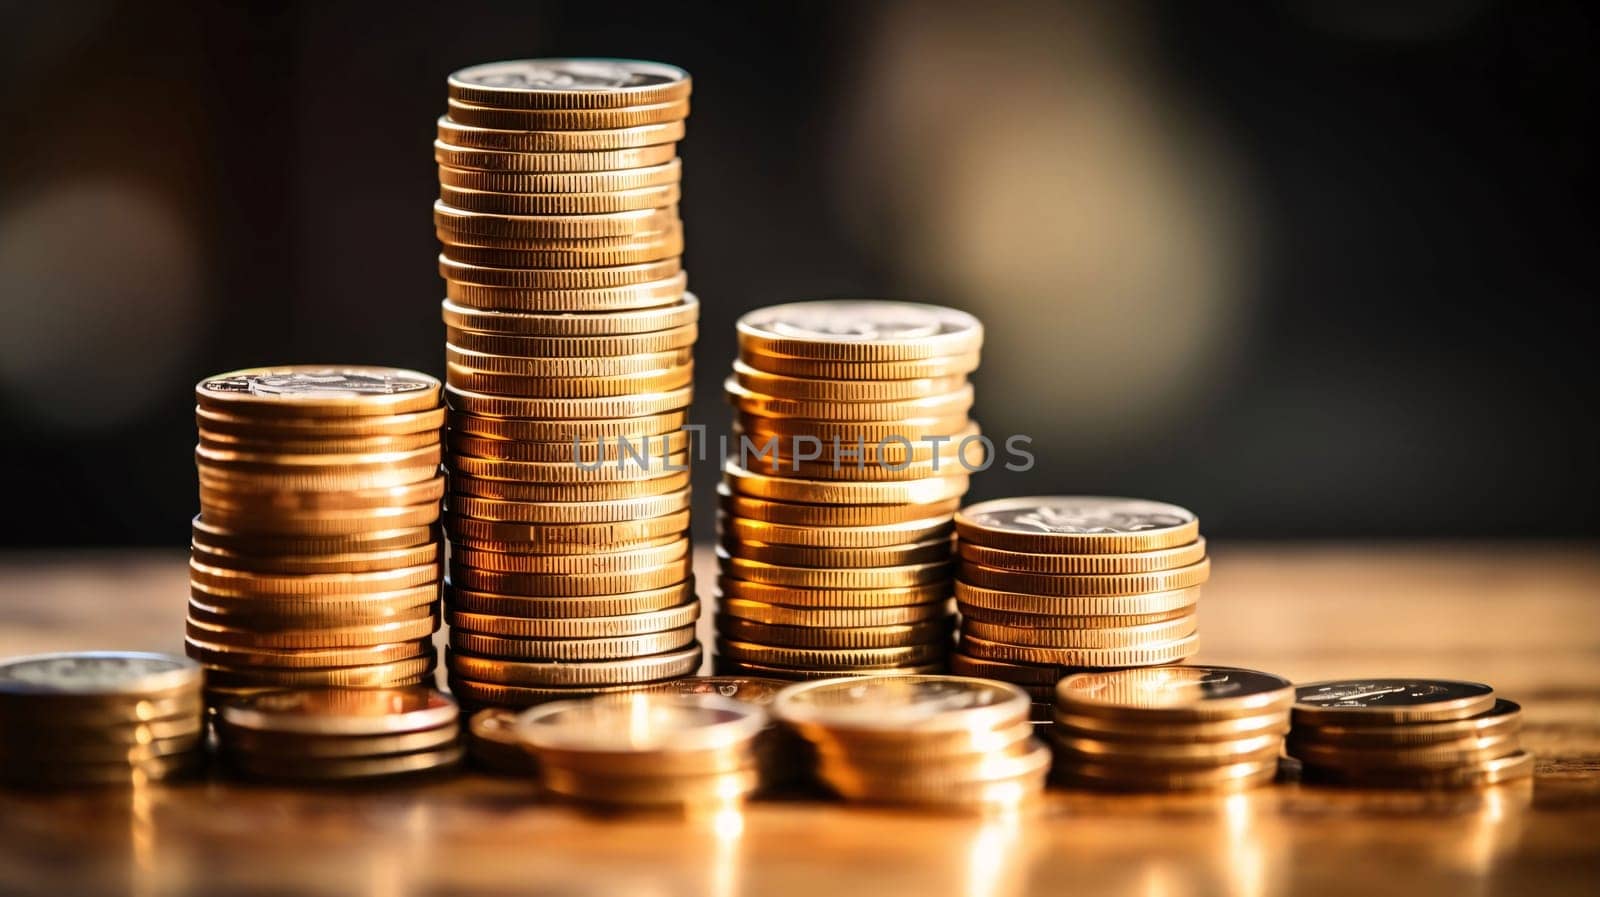 Stock Market: Stack of coins on wooden table with blurred background. Business and finance concept.